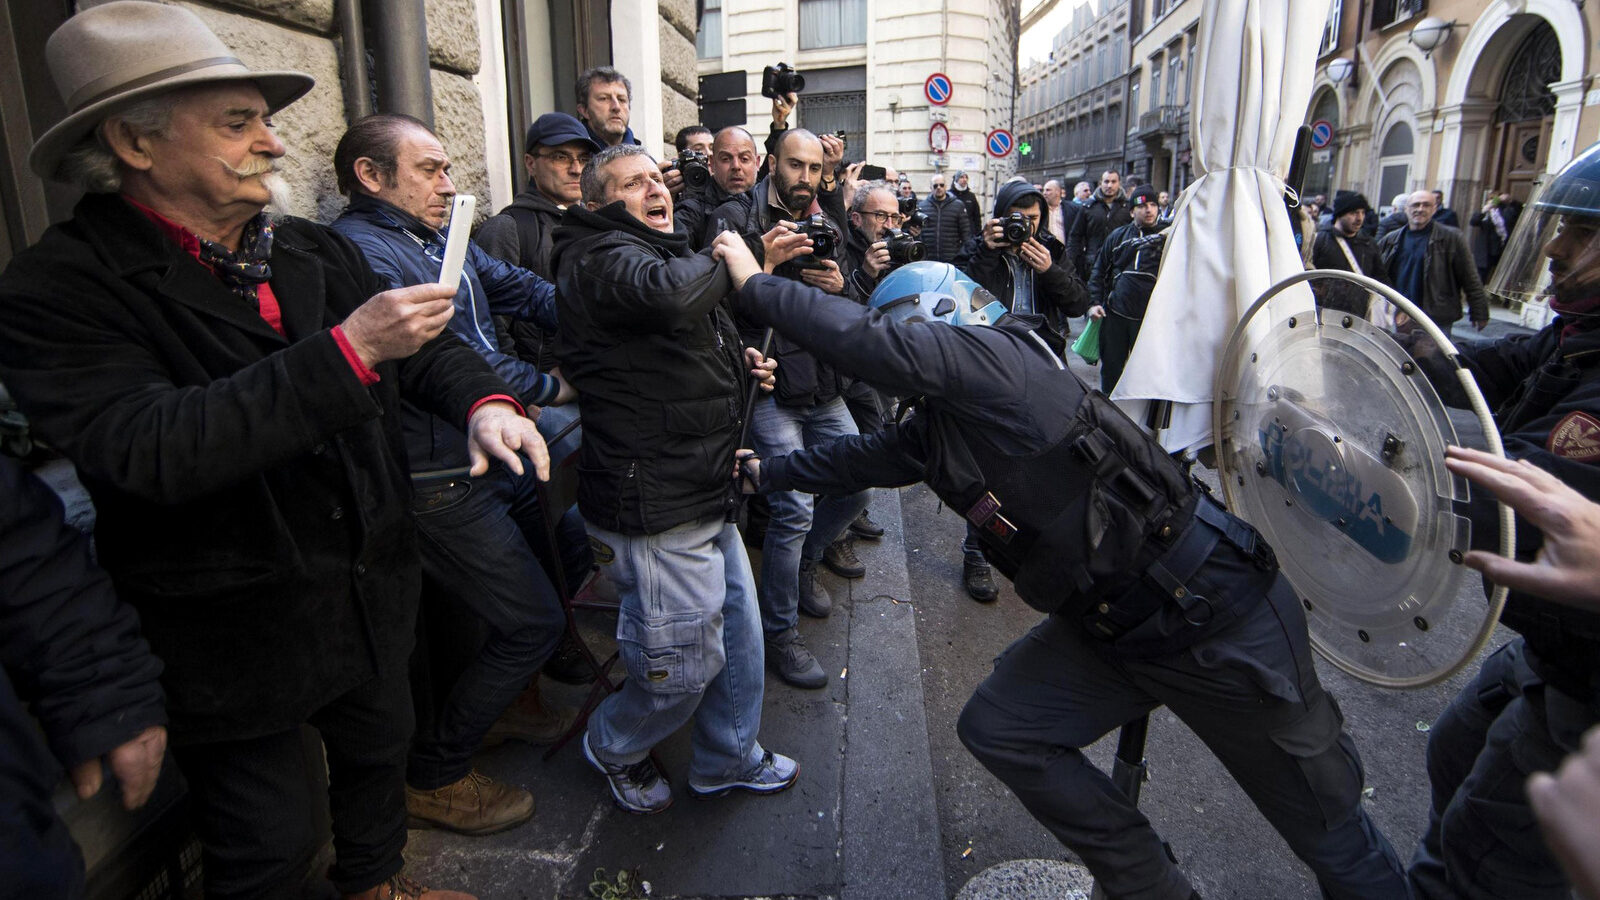 Riot police clash with taxi drivers and street sellers during a demonstration, in Rome, Tuesday, February 21, 2017. A weeklong strike by taxi drivers that has crippled transport in Rome, Milan and Turin is heating up, with cabbies marching through the eternal city to protest legislation they say will favor Uber and other car-hire services. (Massimo Percossi/ANSA via AP)